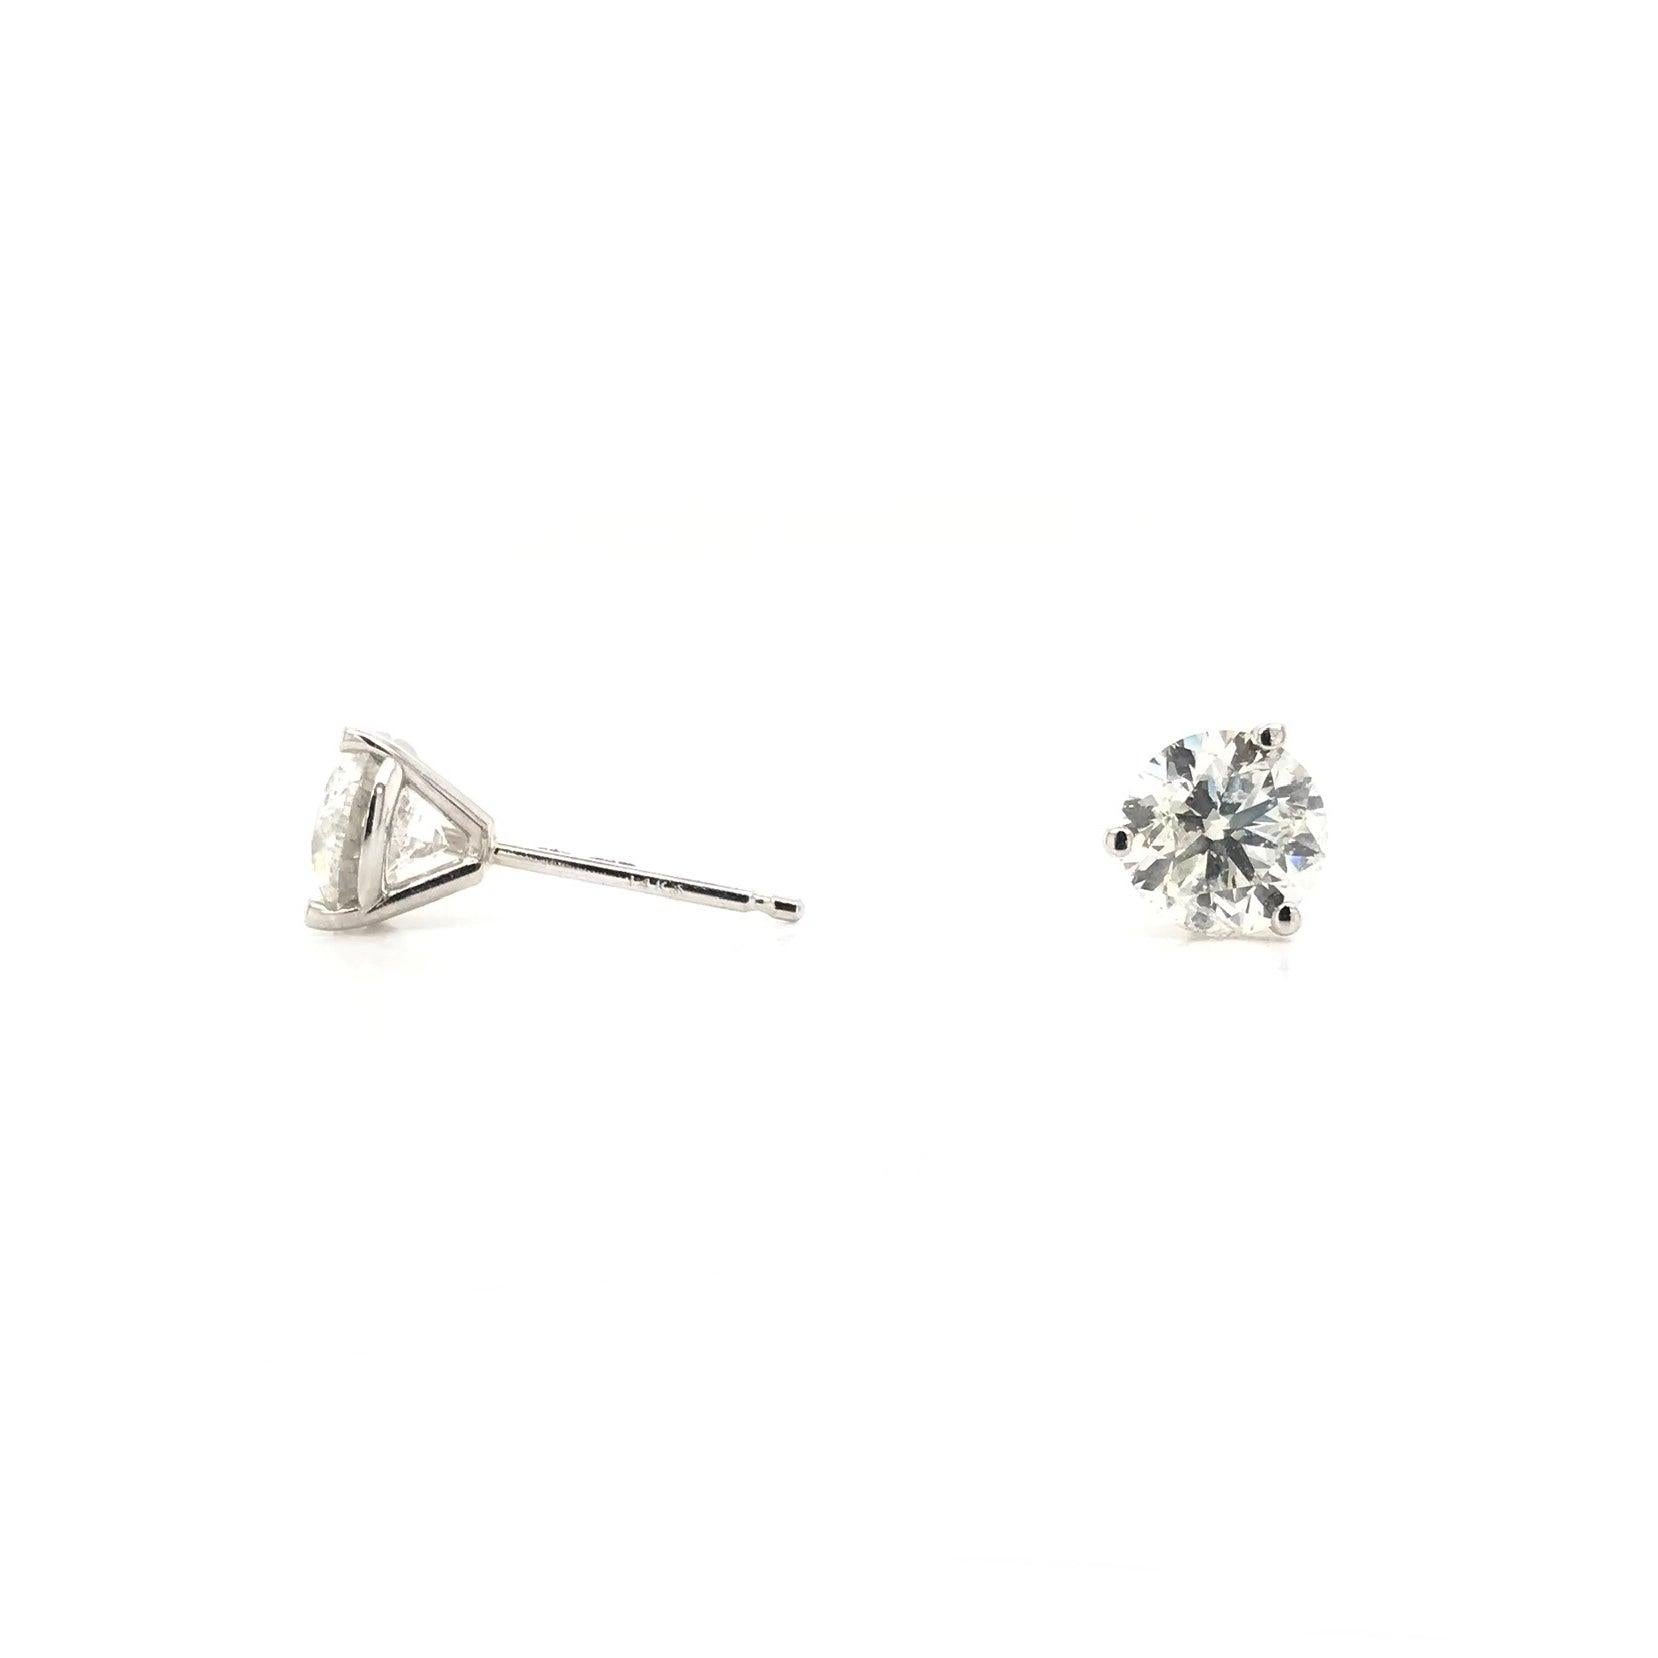 These contemporary style diamond earrings feature approximately 1.50 carats of diamonds; combined total weight. The settings are 14k white gold and are 